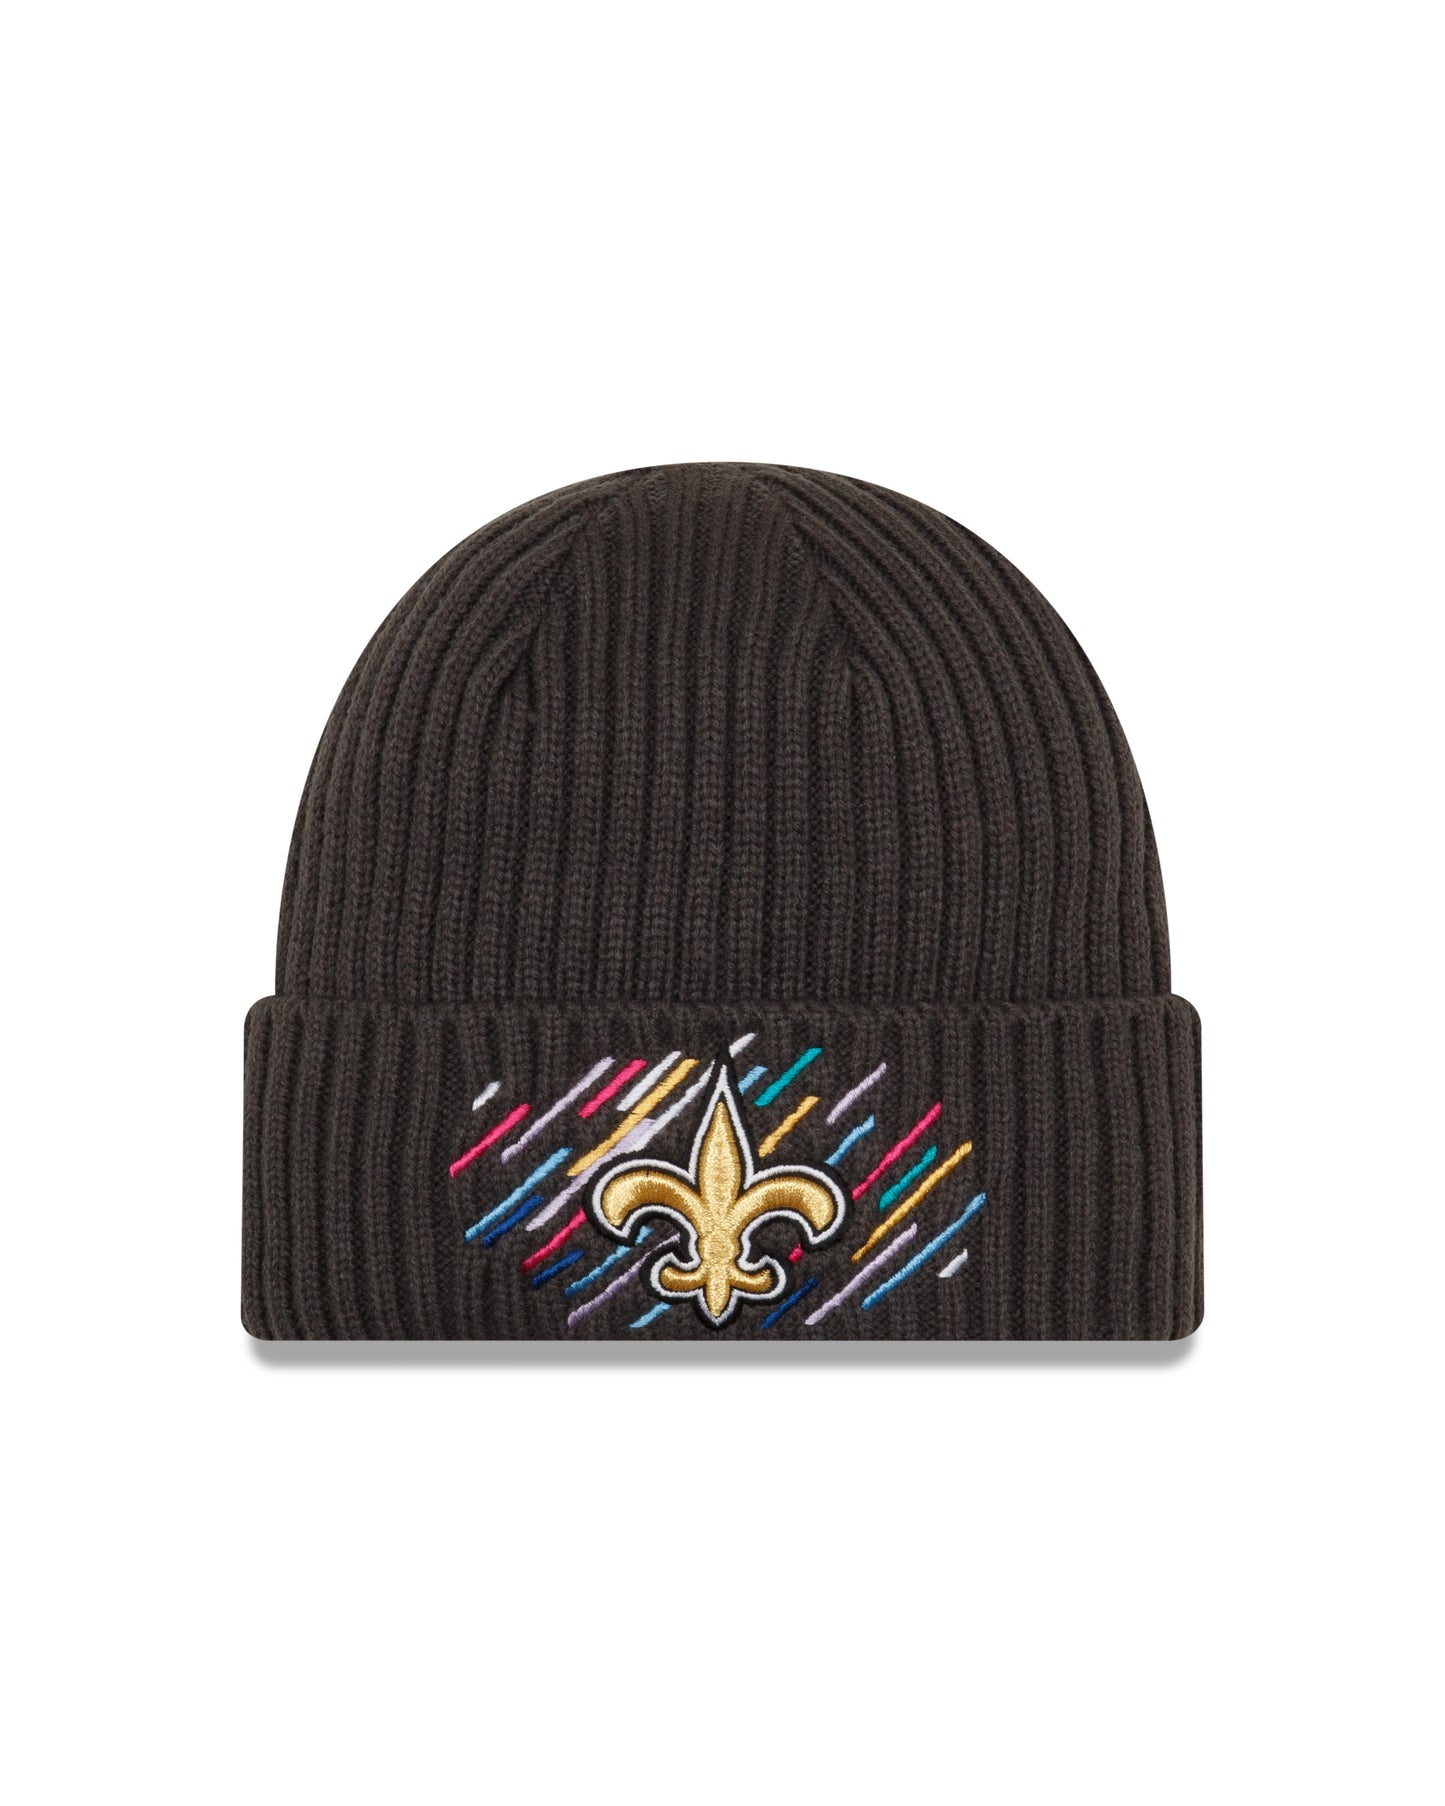 New Orleans Saints New Era Crucial Catch Cuffed Knit Hat - Gray